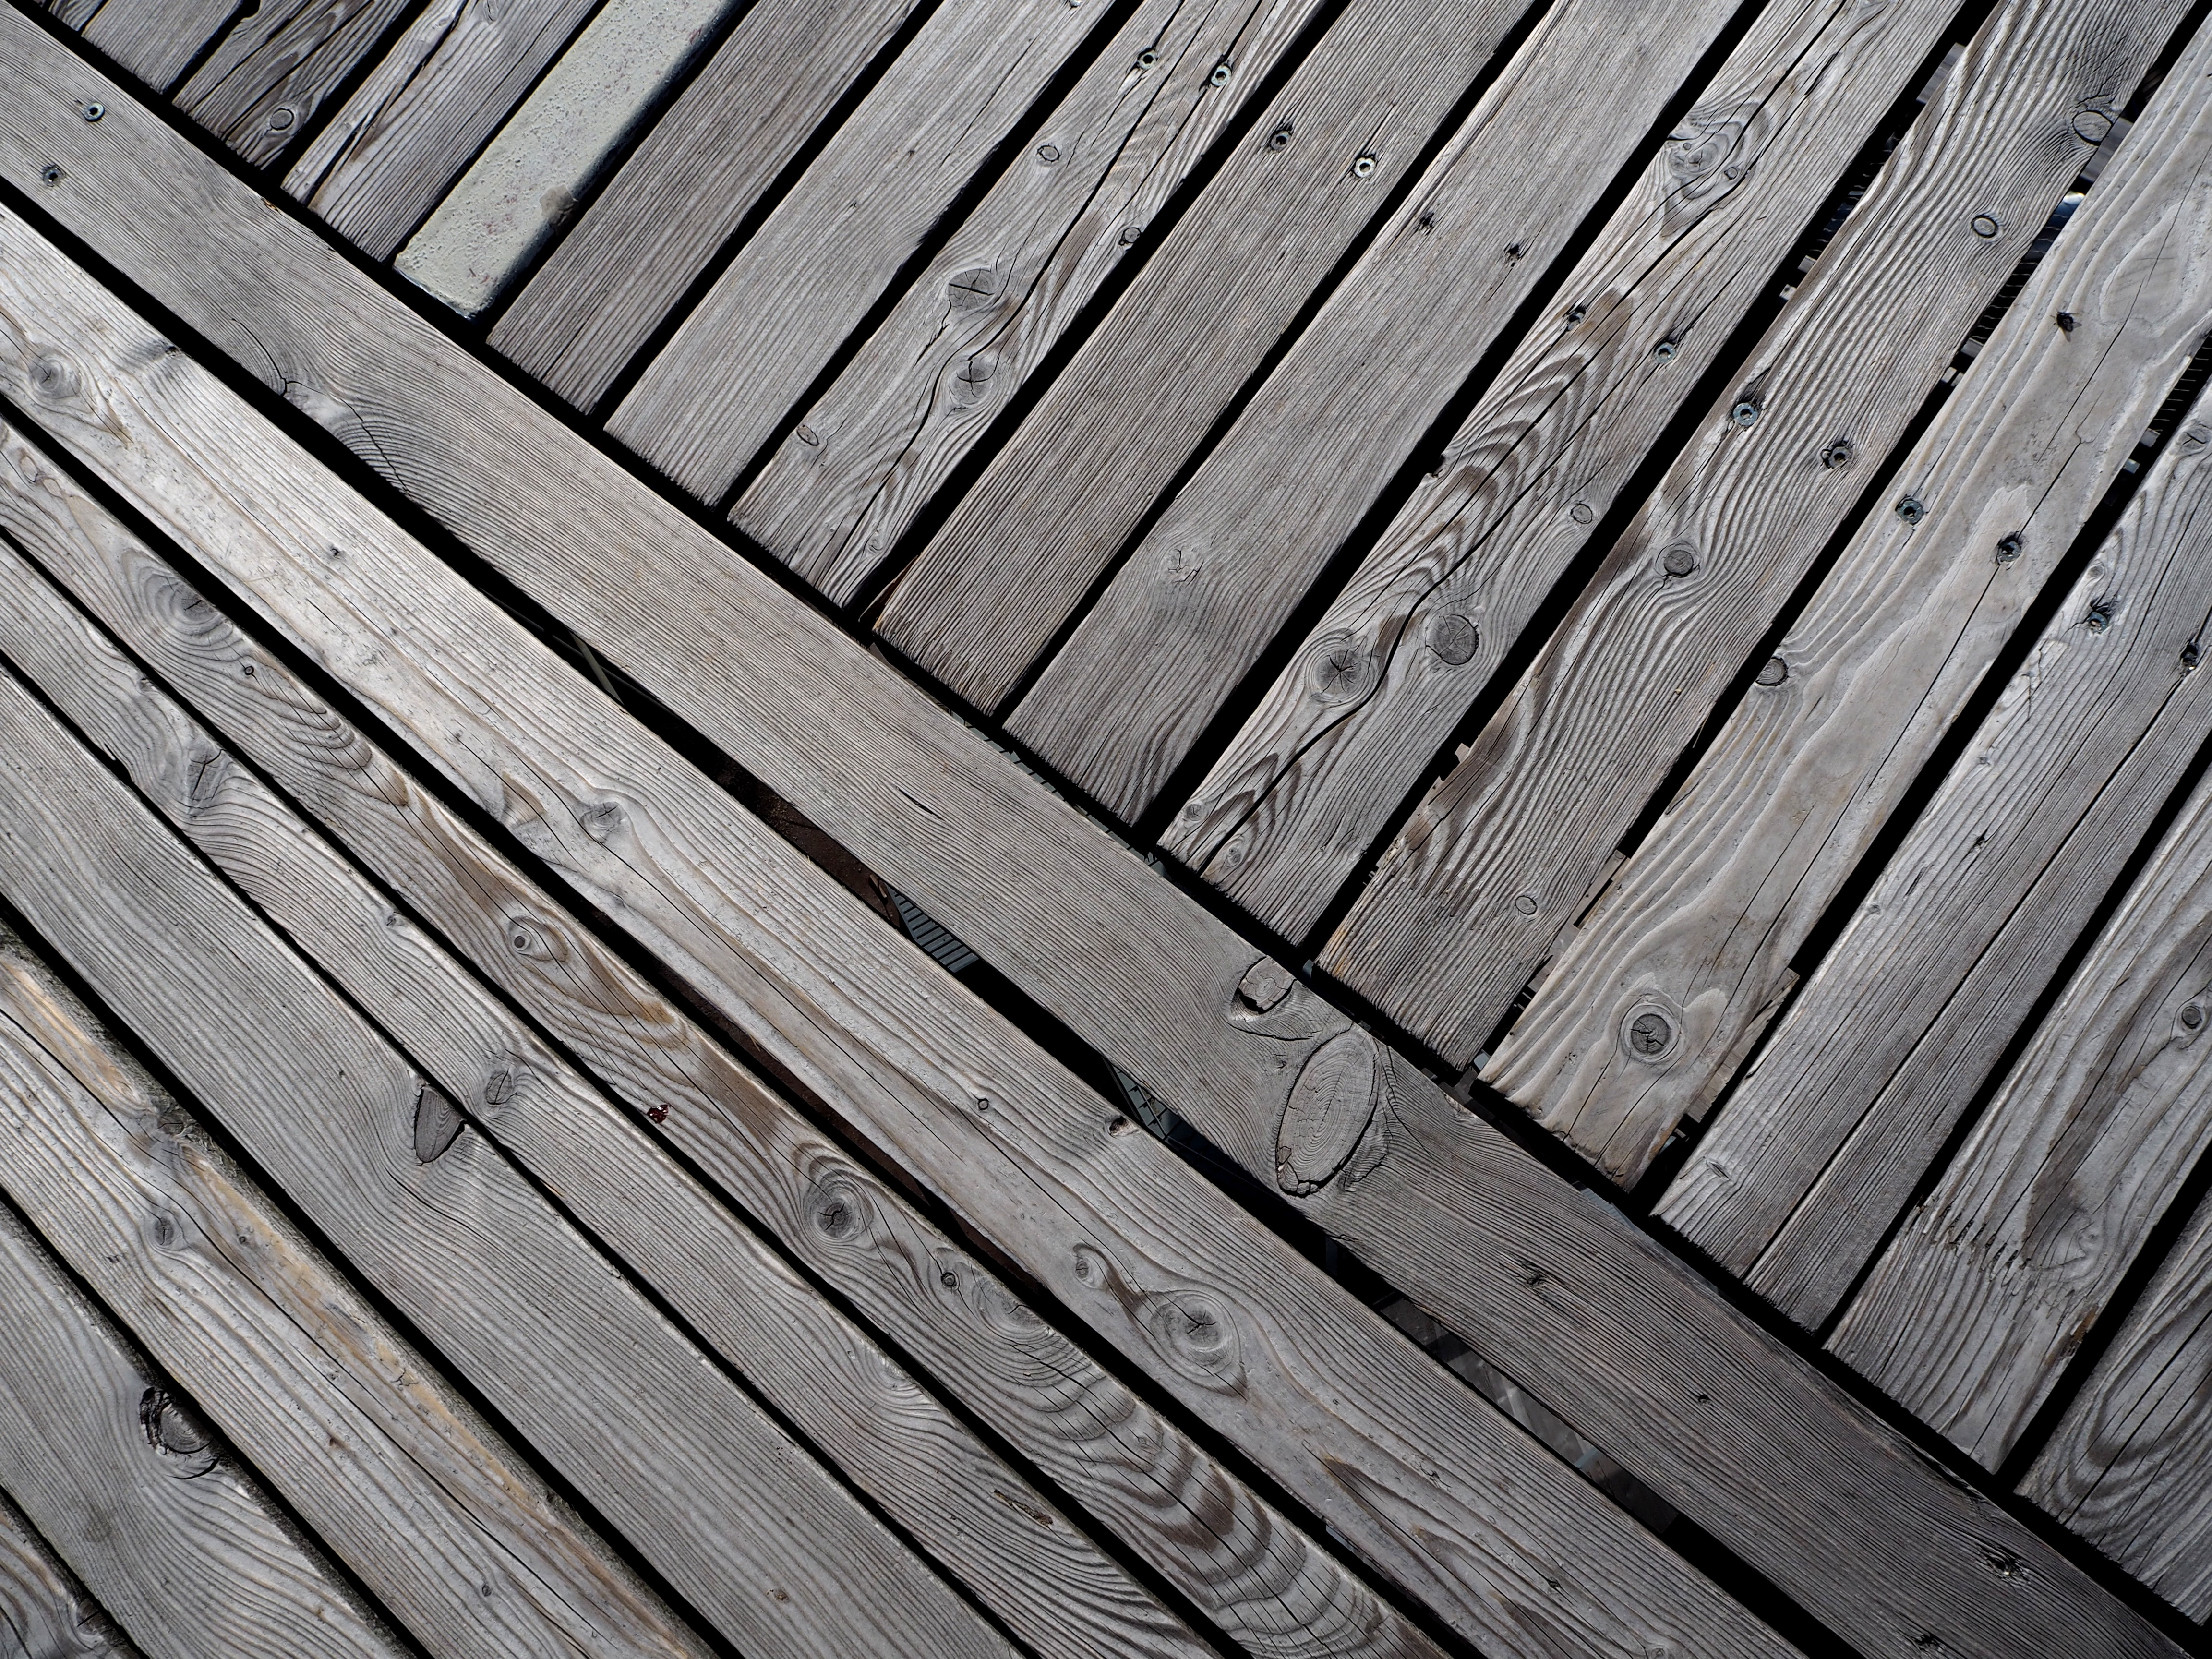 wooden, texture, surface, wood, textures, planks, board